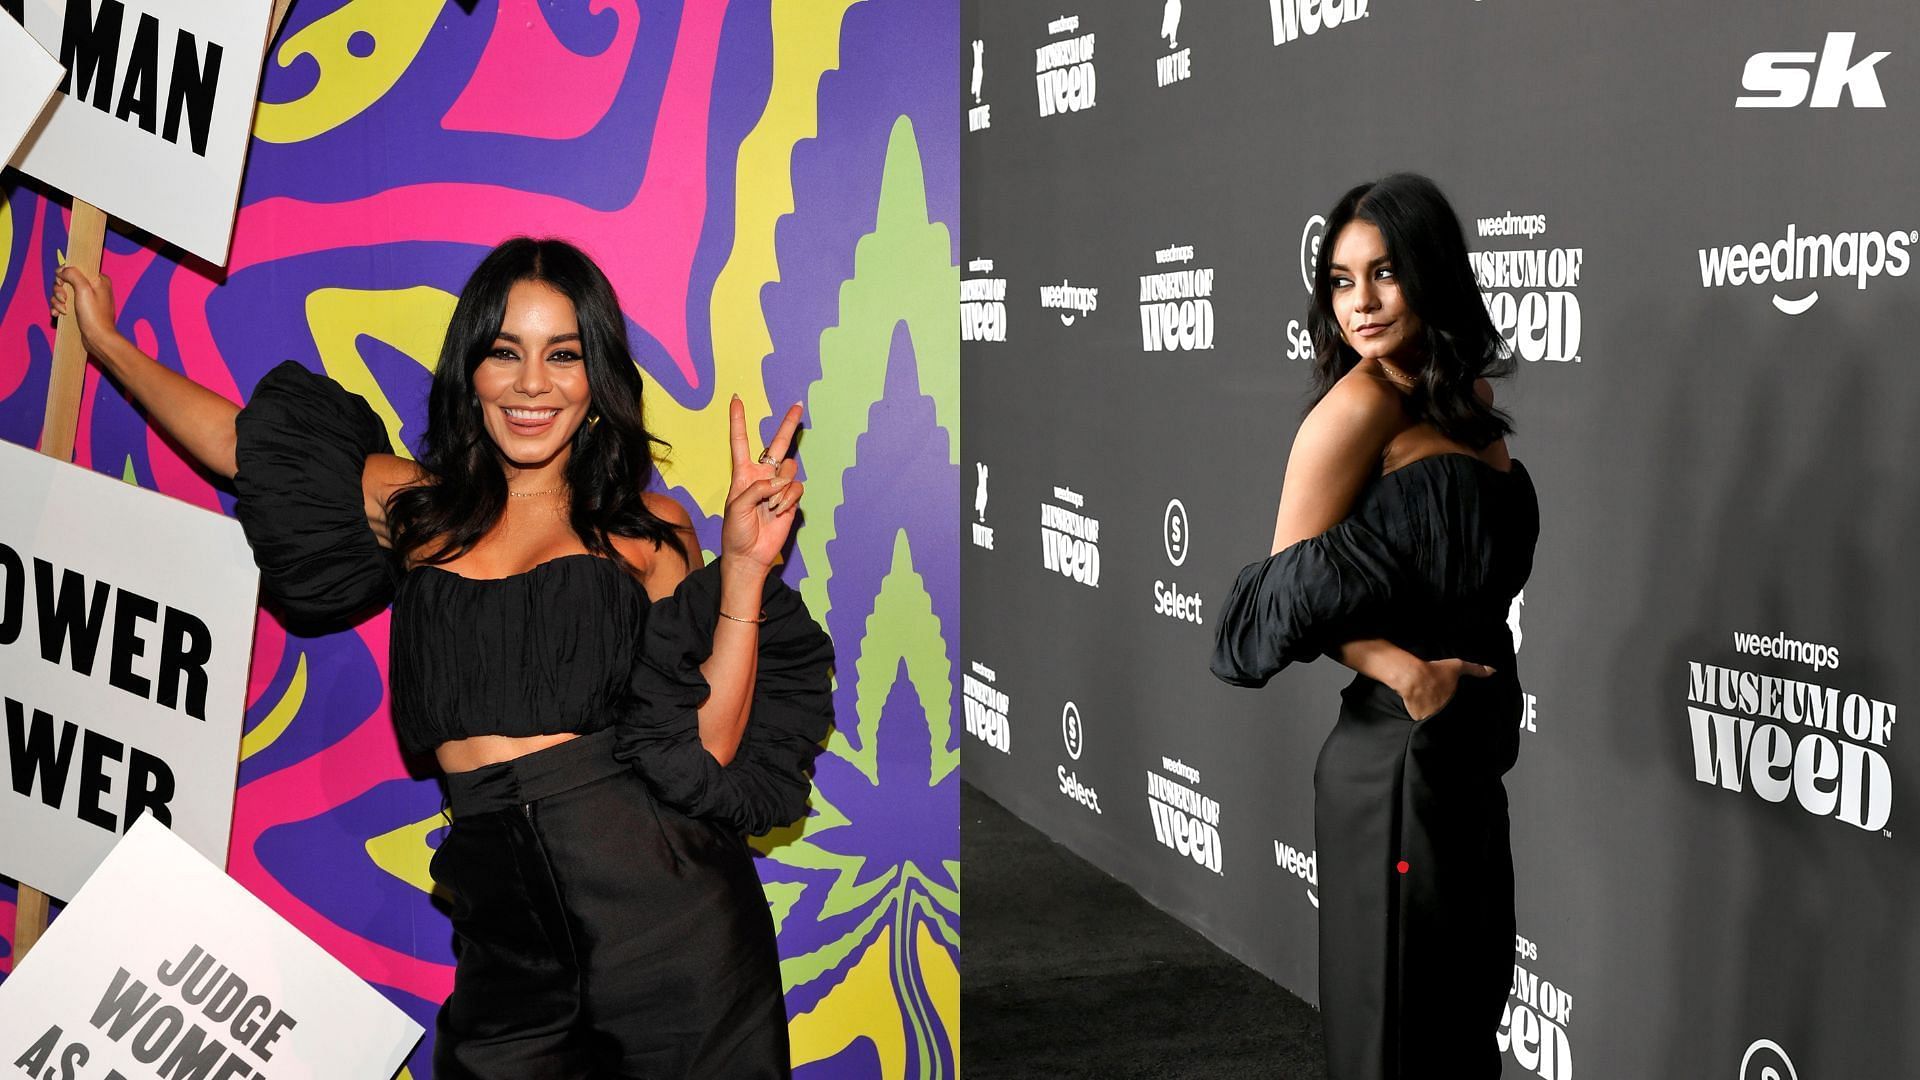 Actress Vanessa Hudgens gave fans a first look at her new, married life